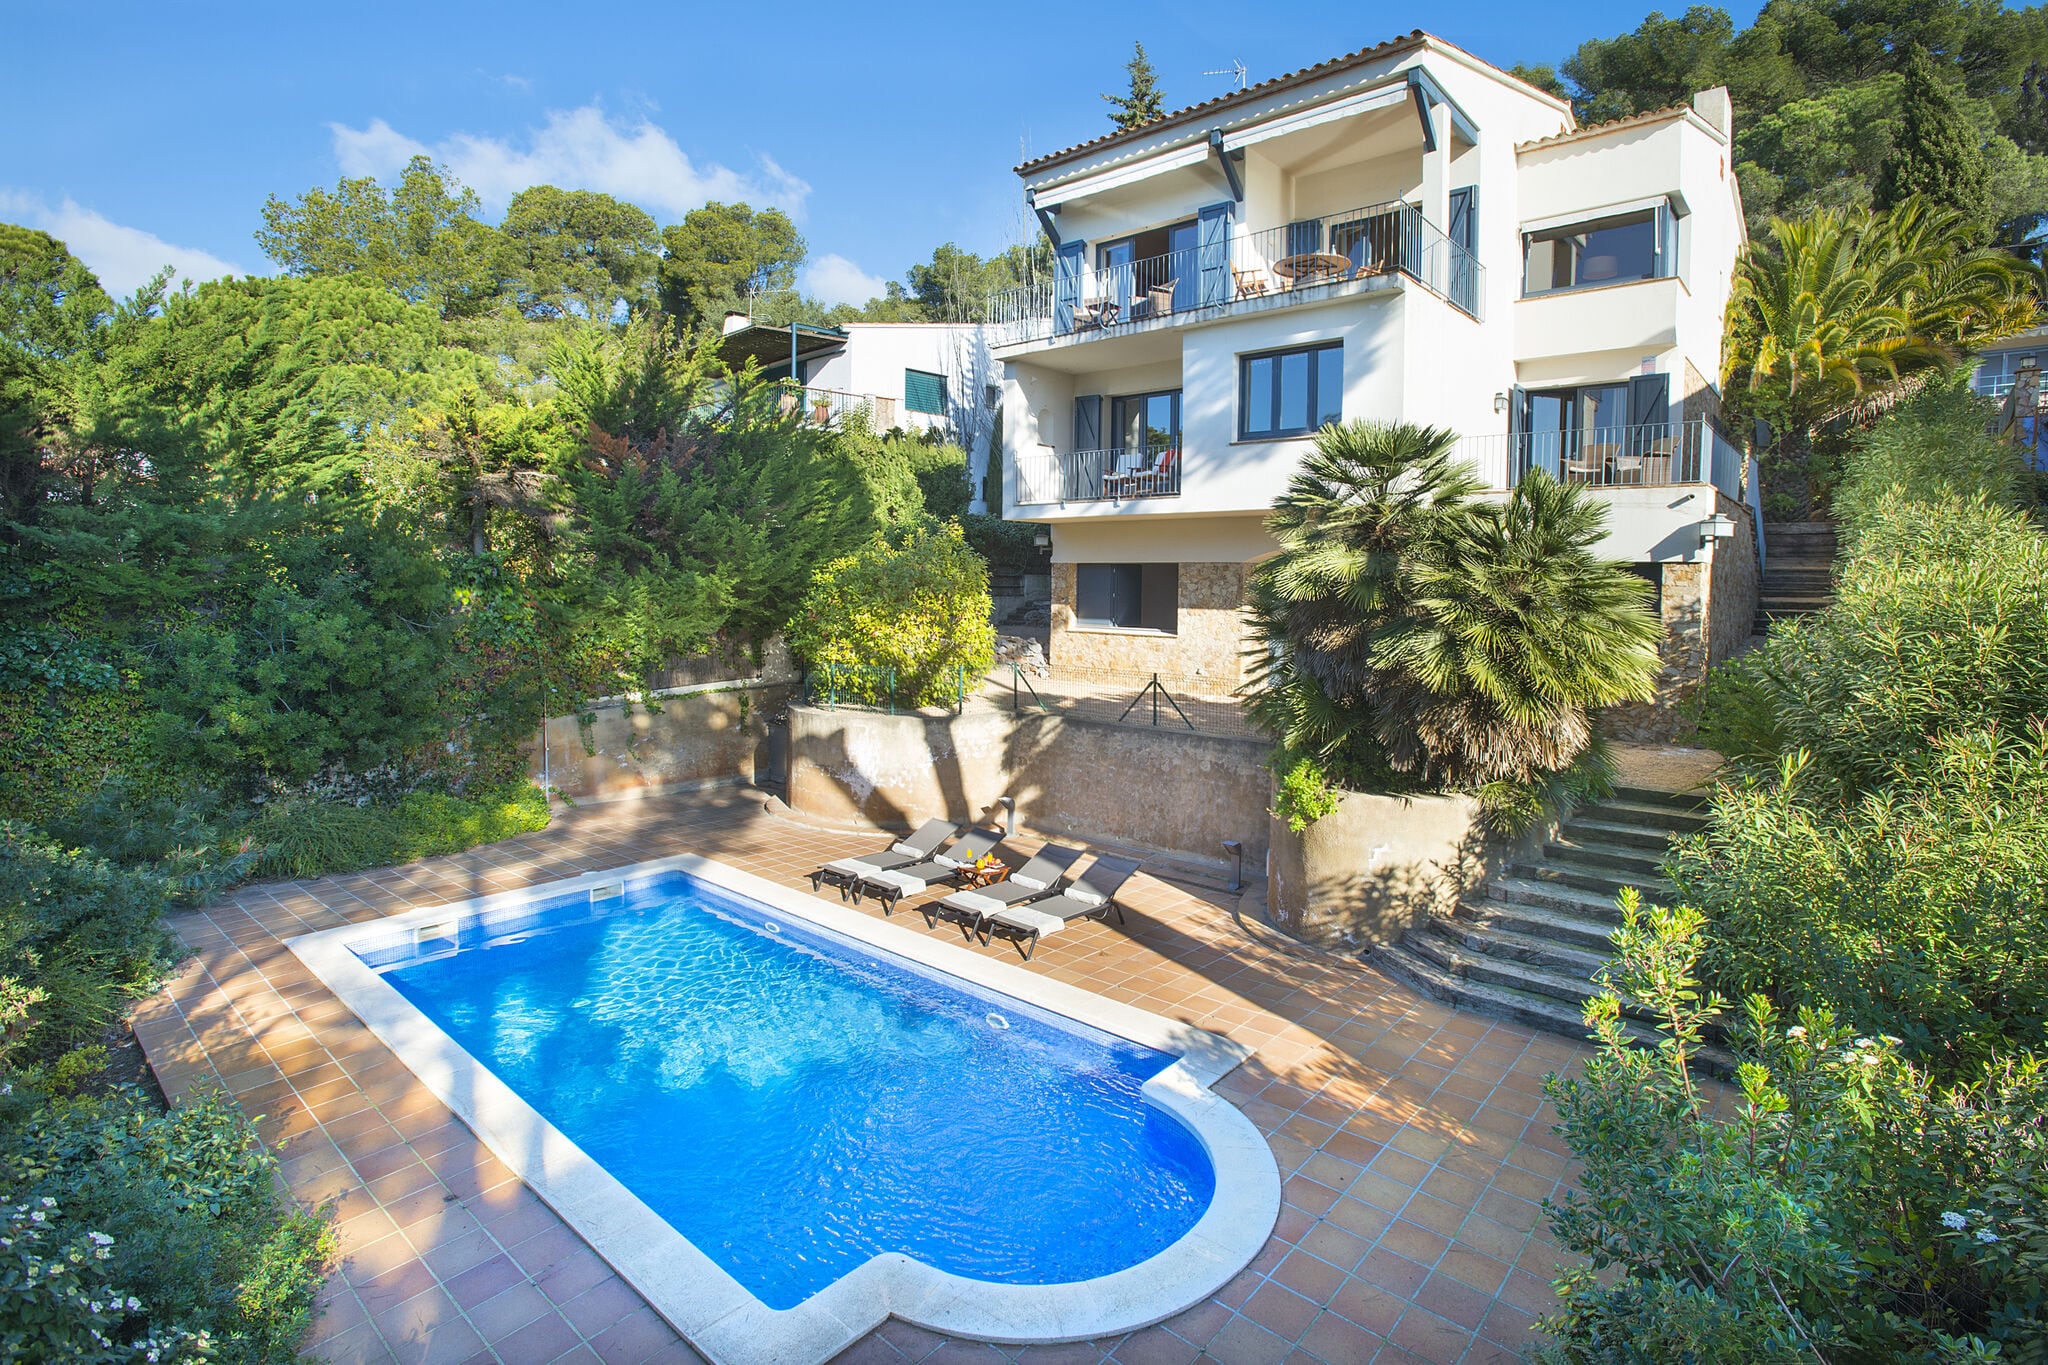 Magnificent house situated in Llafranc with a private pool